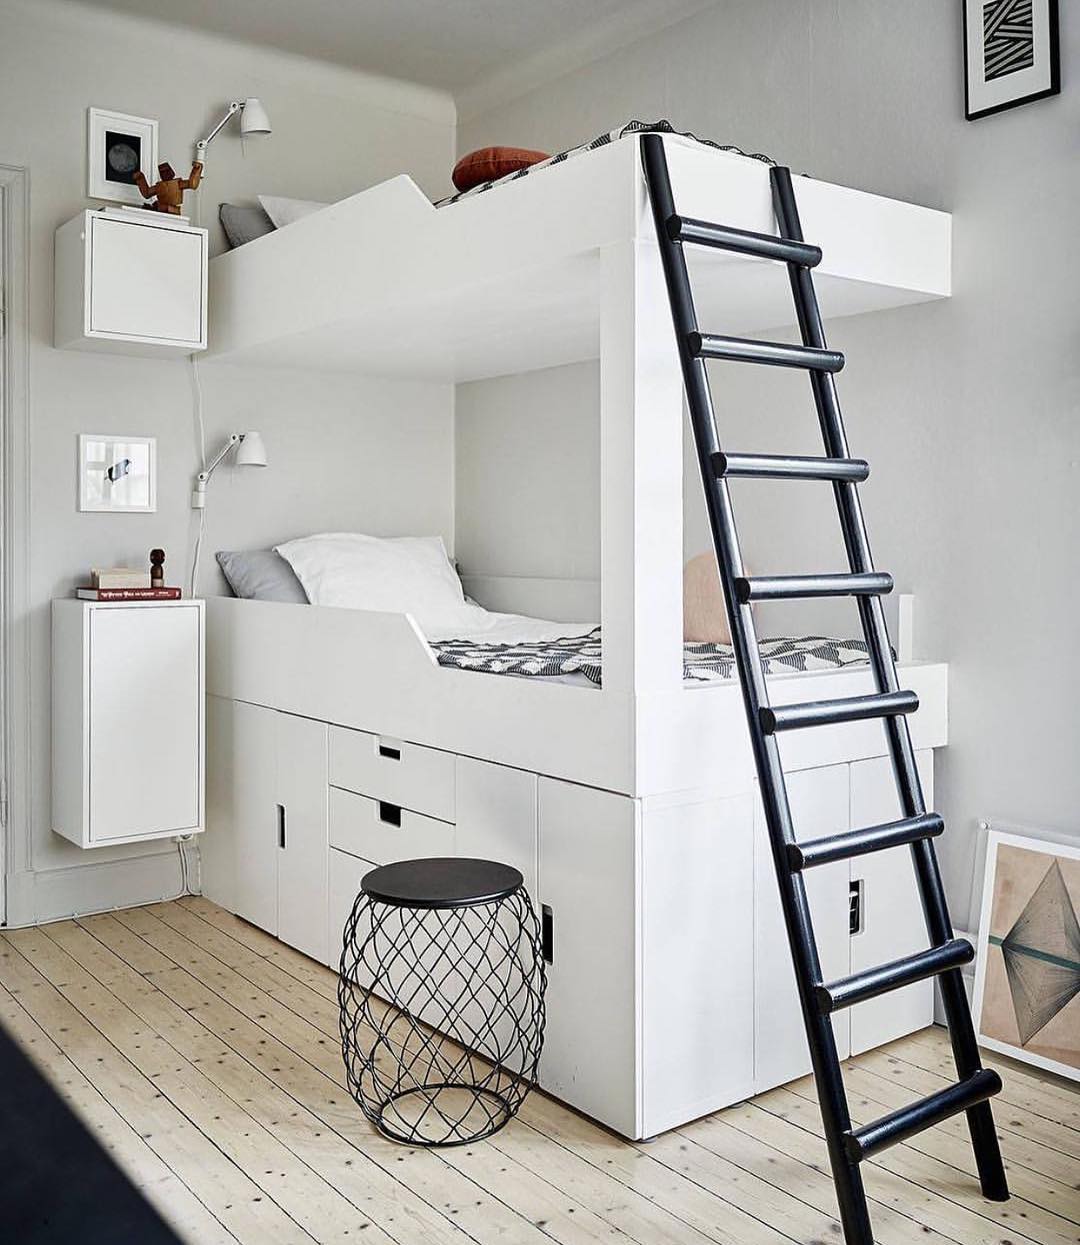 20 Ideas for Designing Shared Kids Rooms   Extra Space Storage